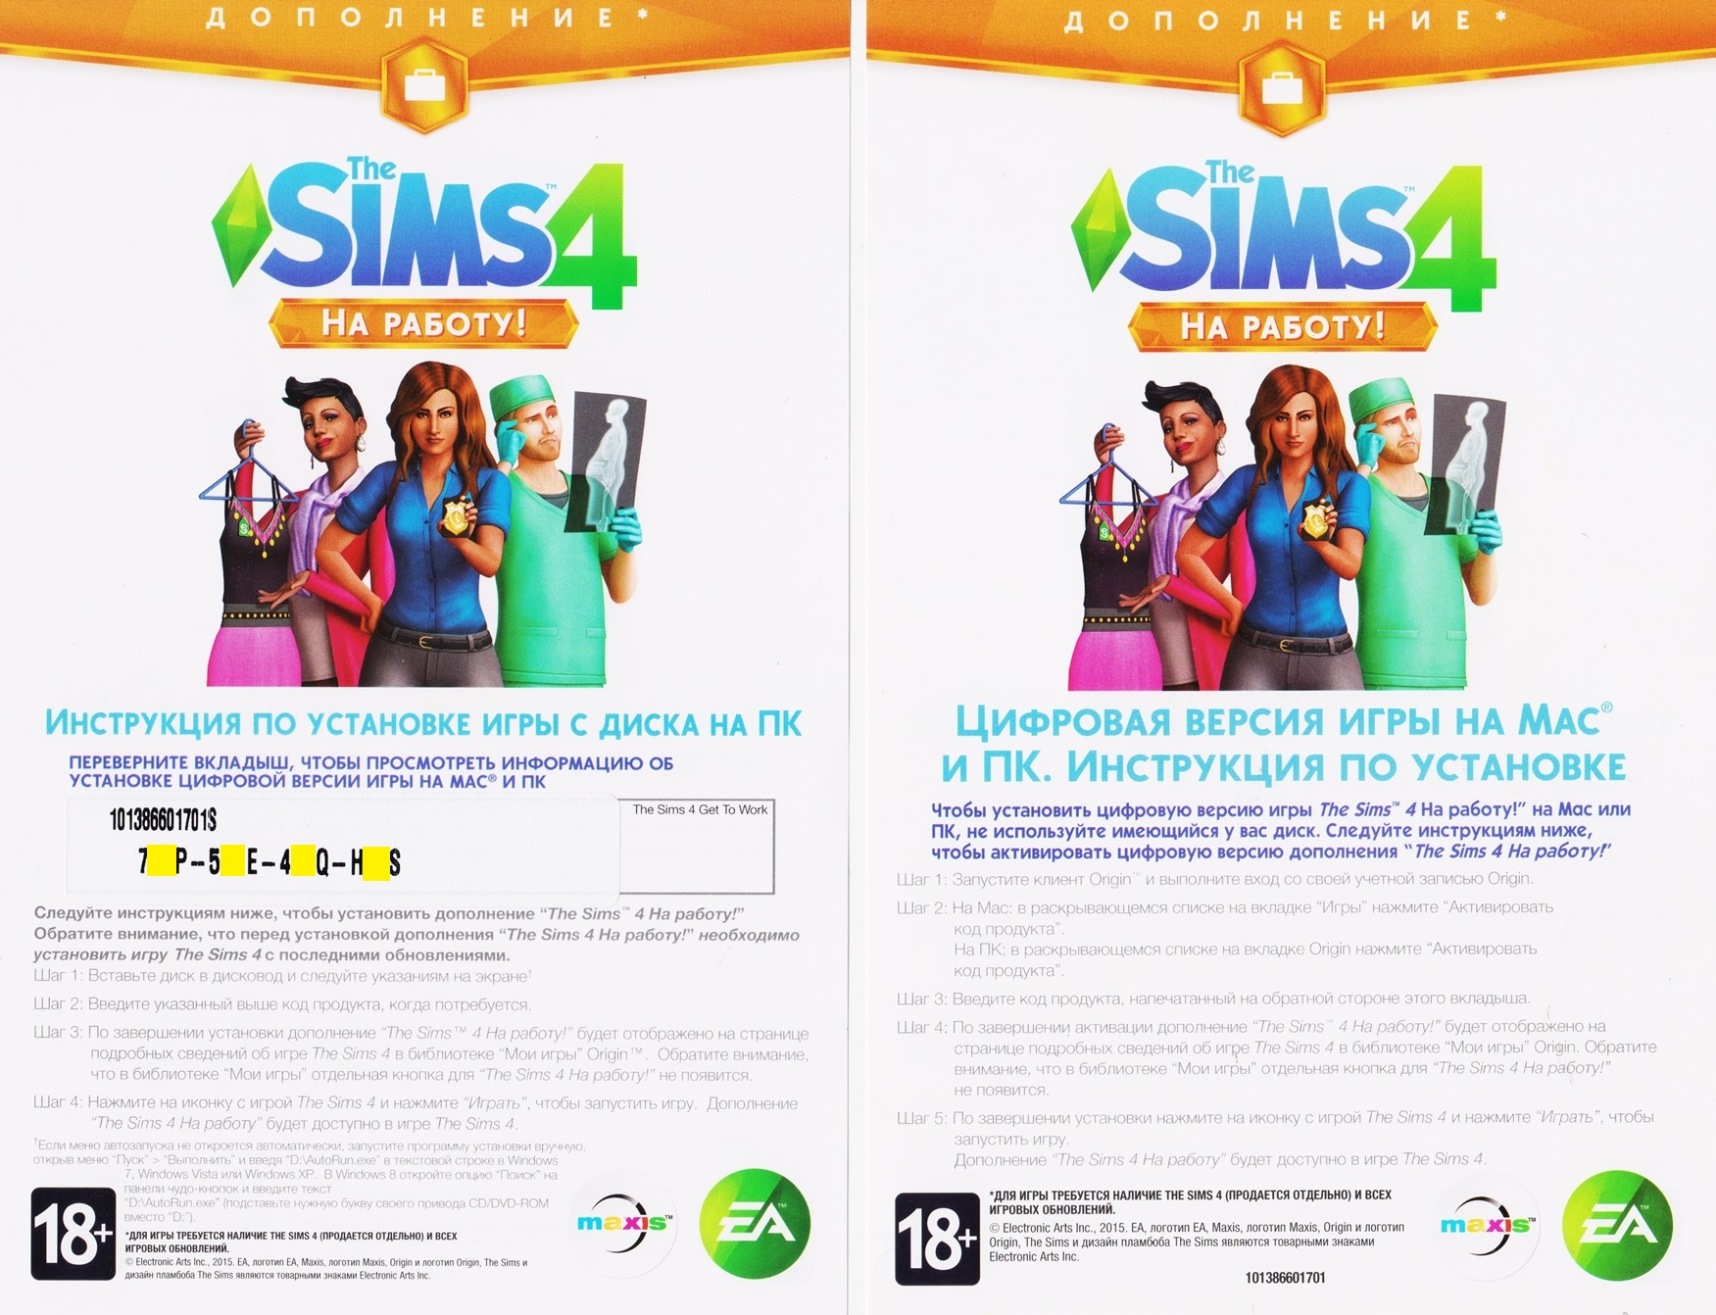 Buy The Sims 4 (DLC) Get to Work (Photo CD-Key) and download